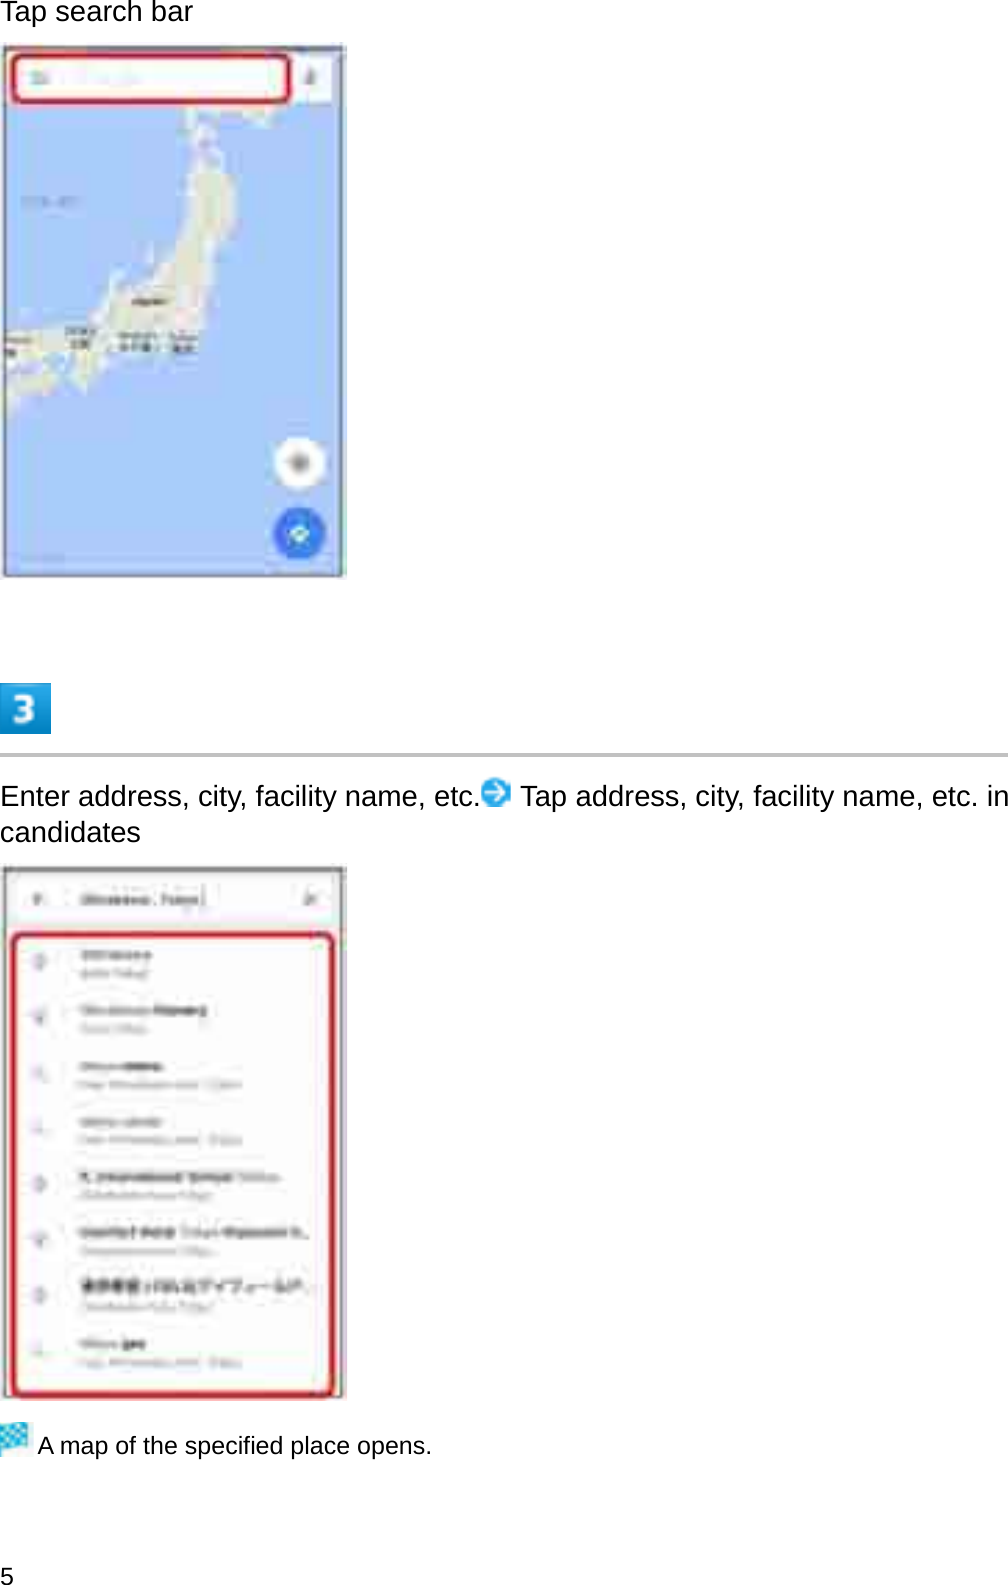 Tap search barEnter address, city, facility name, etc. Tap address, city, facility name, etc. in candidatesA map of the specified place opens.5